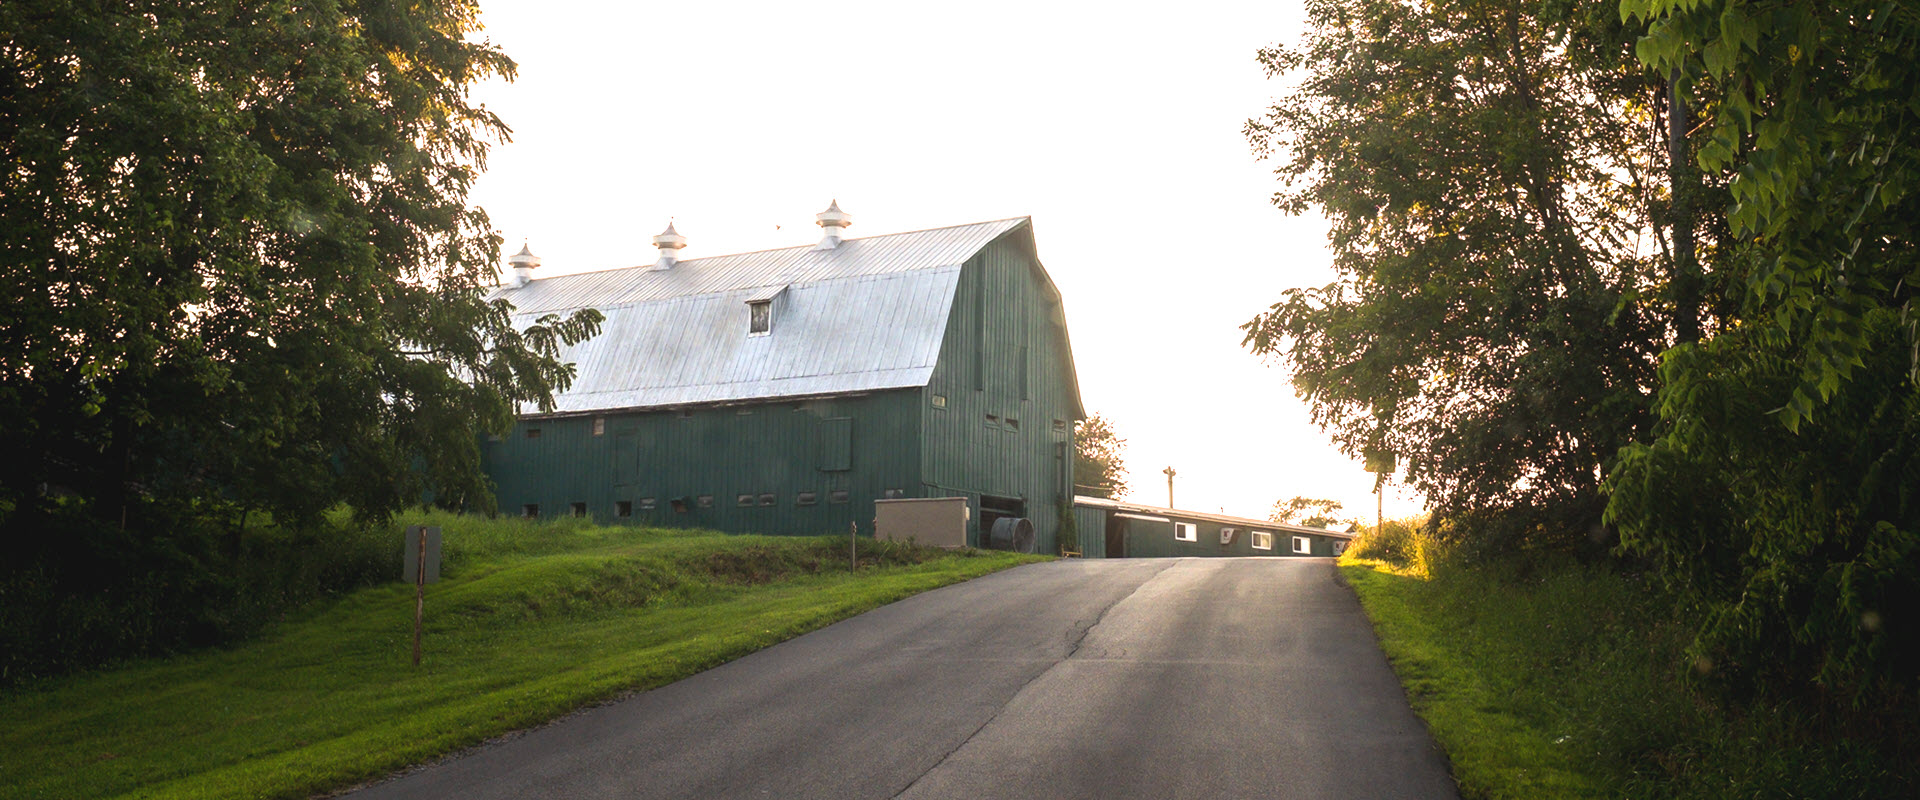 Auction barn along the road